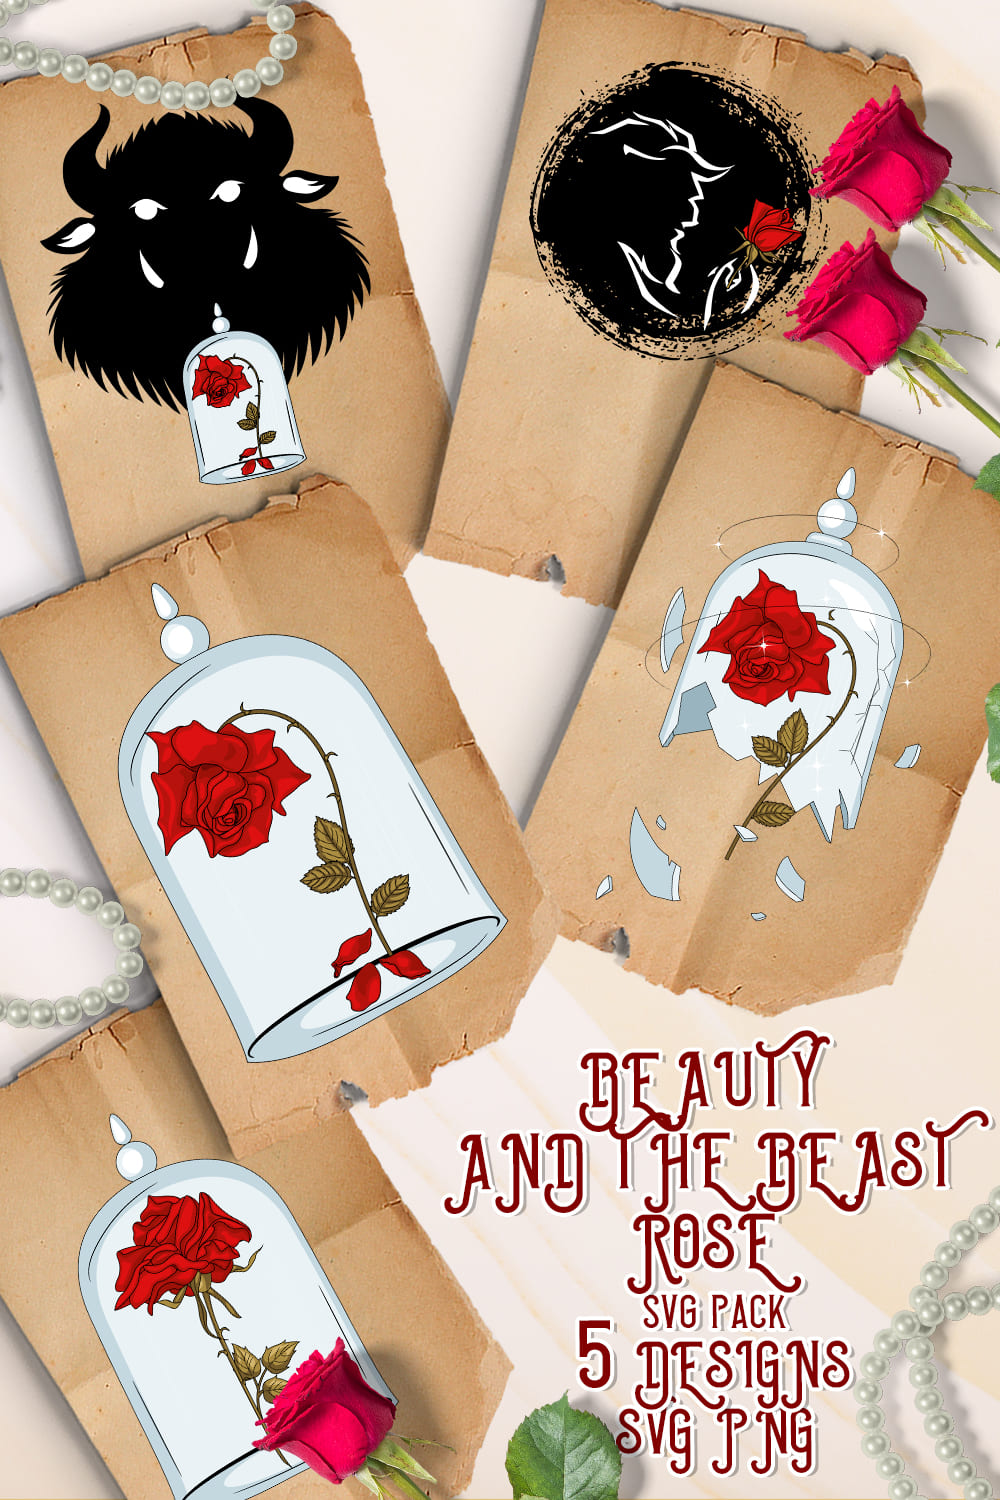 Beauty And The Beast Rose Svg - Pinterest.